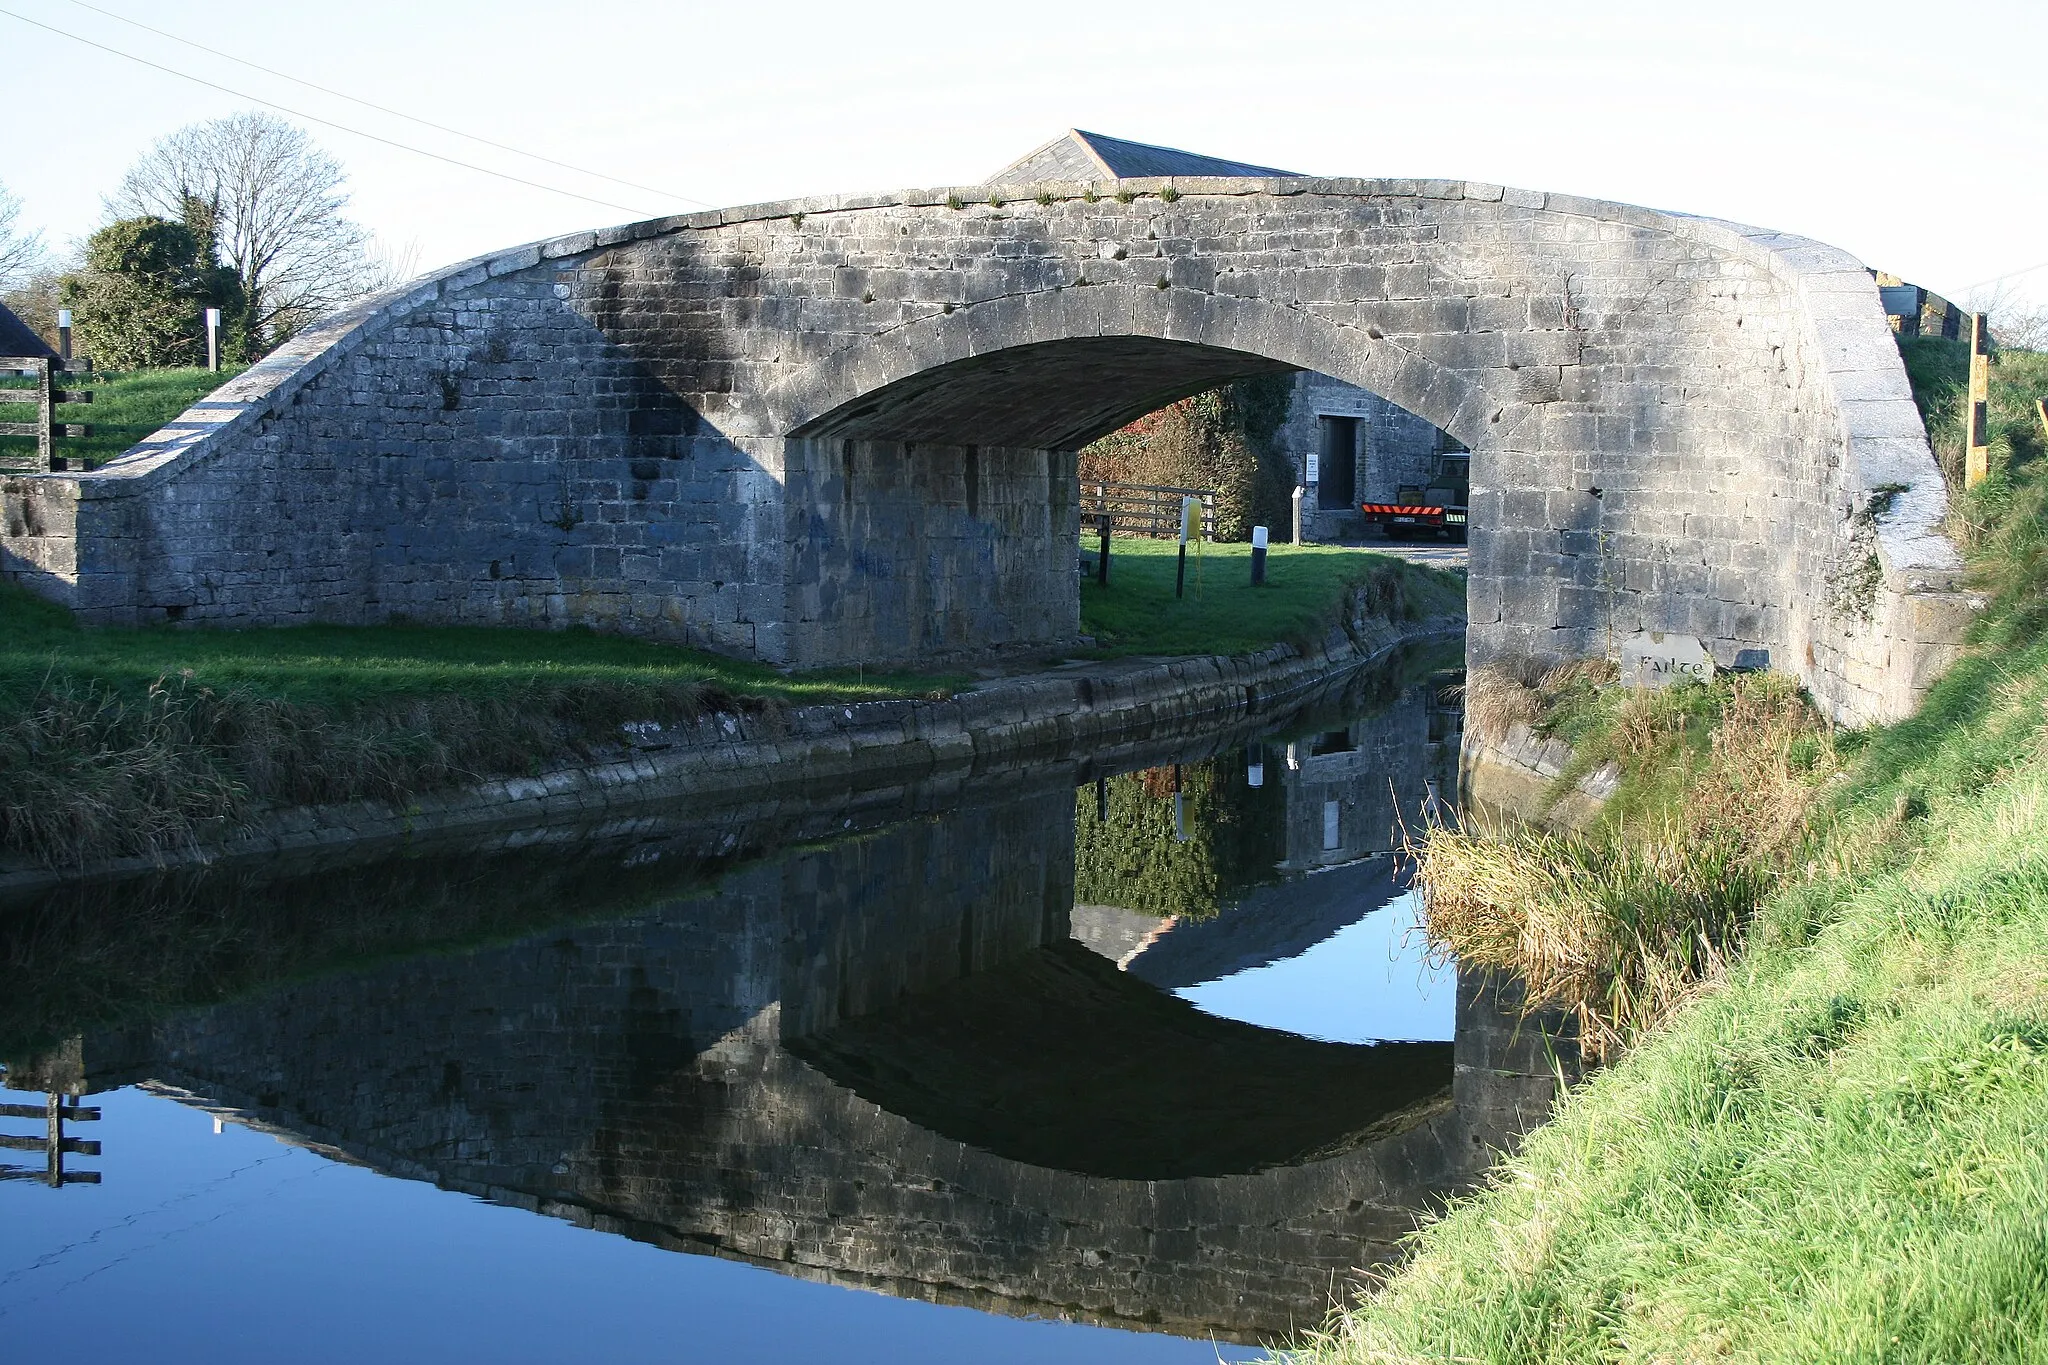 Photo showing: The R427 bridging over the Grand Canal at Vicarstown, County Laois, Ireland